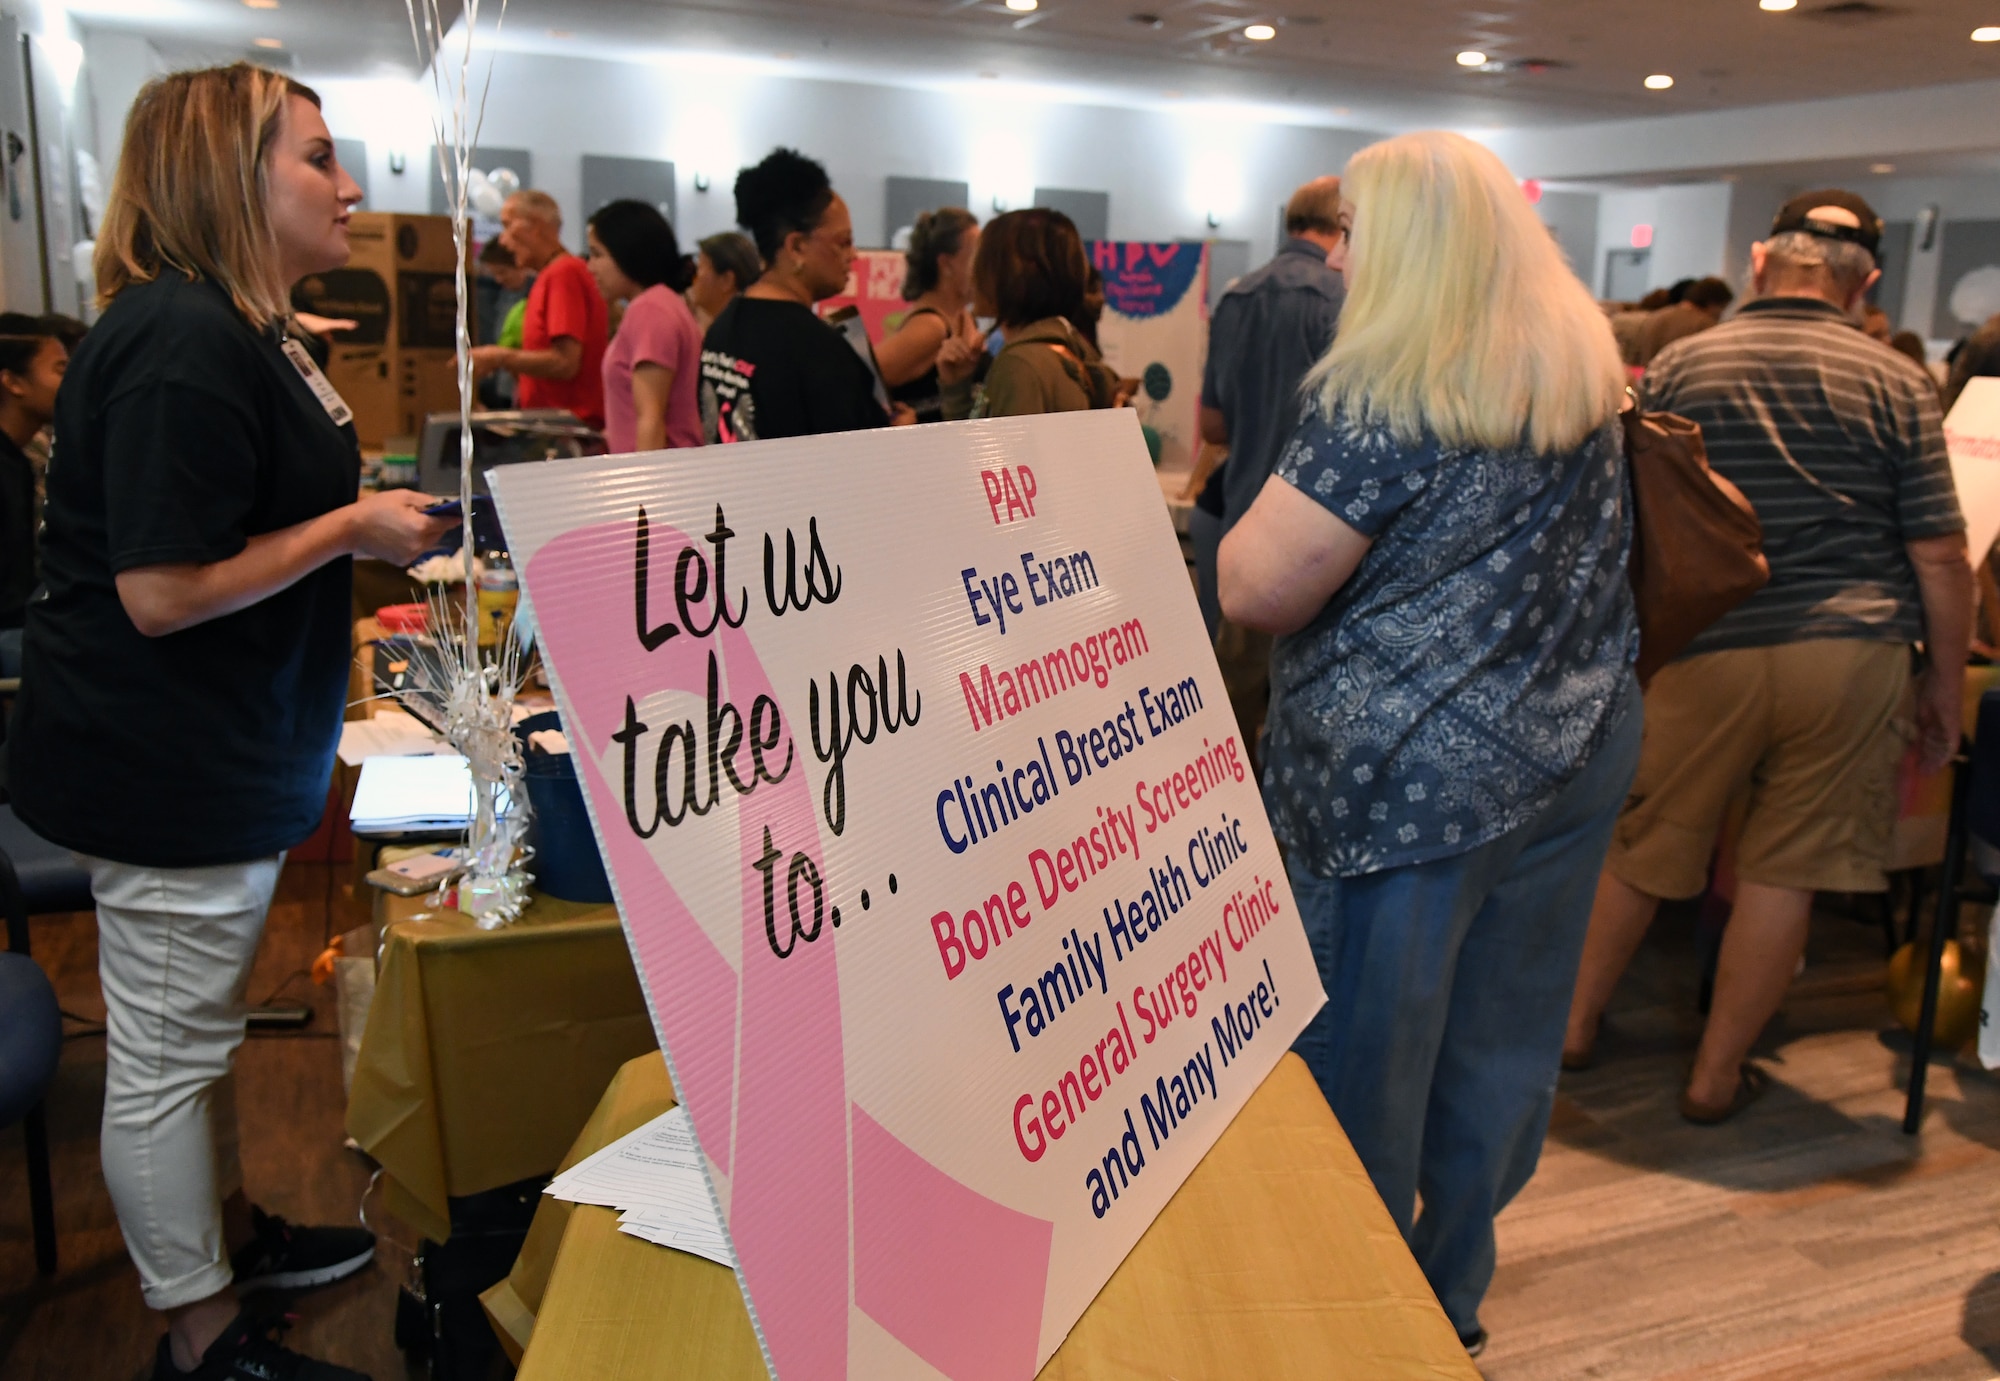 Keesler personnel attend the 81st Medical Group Health Expo inside the Keesler Medical Center at Keesler Air Force Base, Mississippi, Oct. 4, 2019. The 81st MDG hosted the walk-in event which included screenings for multiple types of cancer and chronic diseases in honor of Breast Cancer Awareness Month. (U.S. Air Force photo by Kemberly Groue)